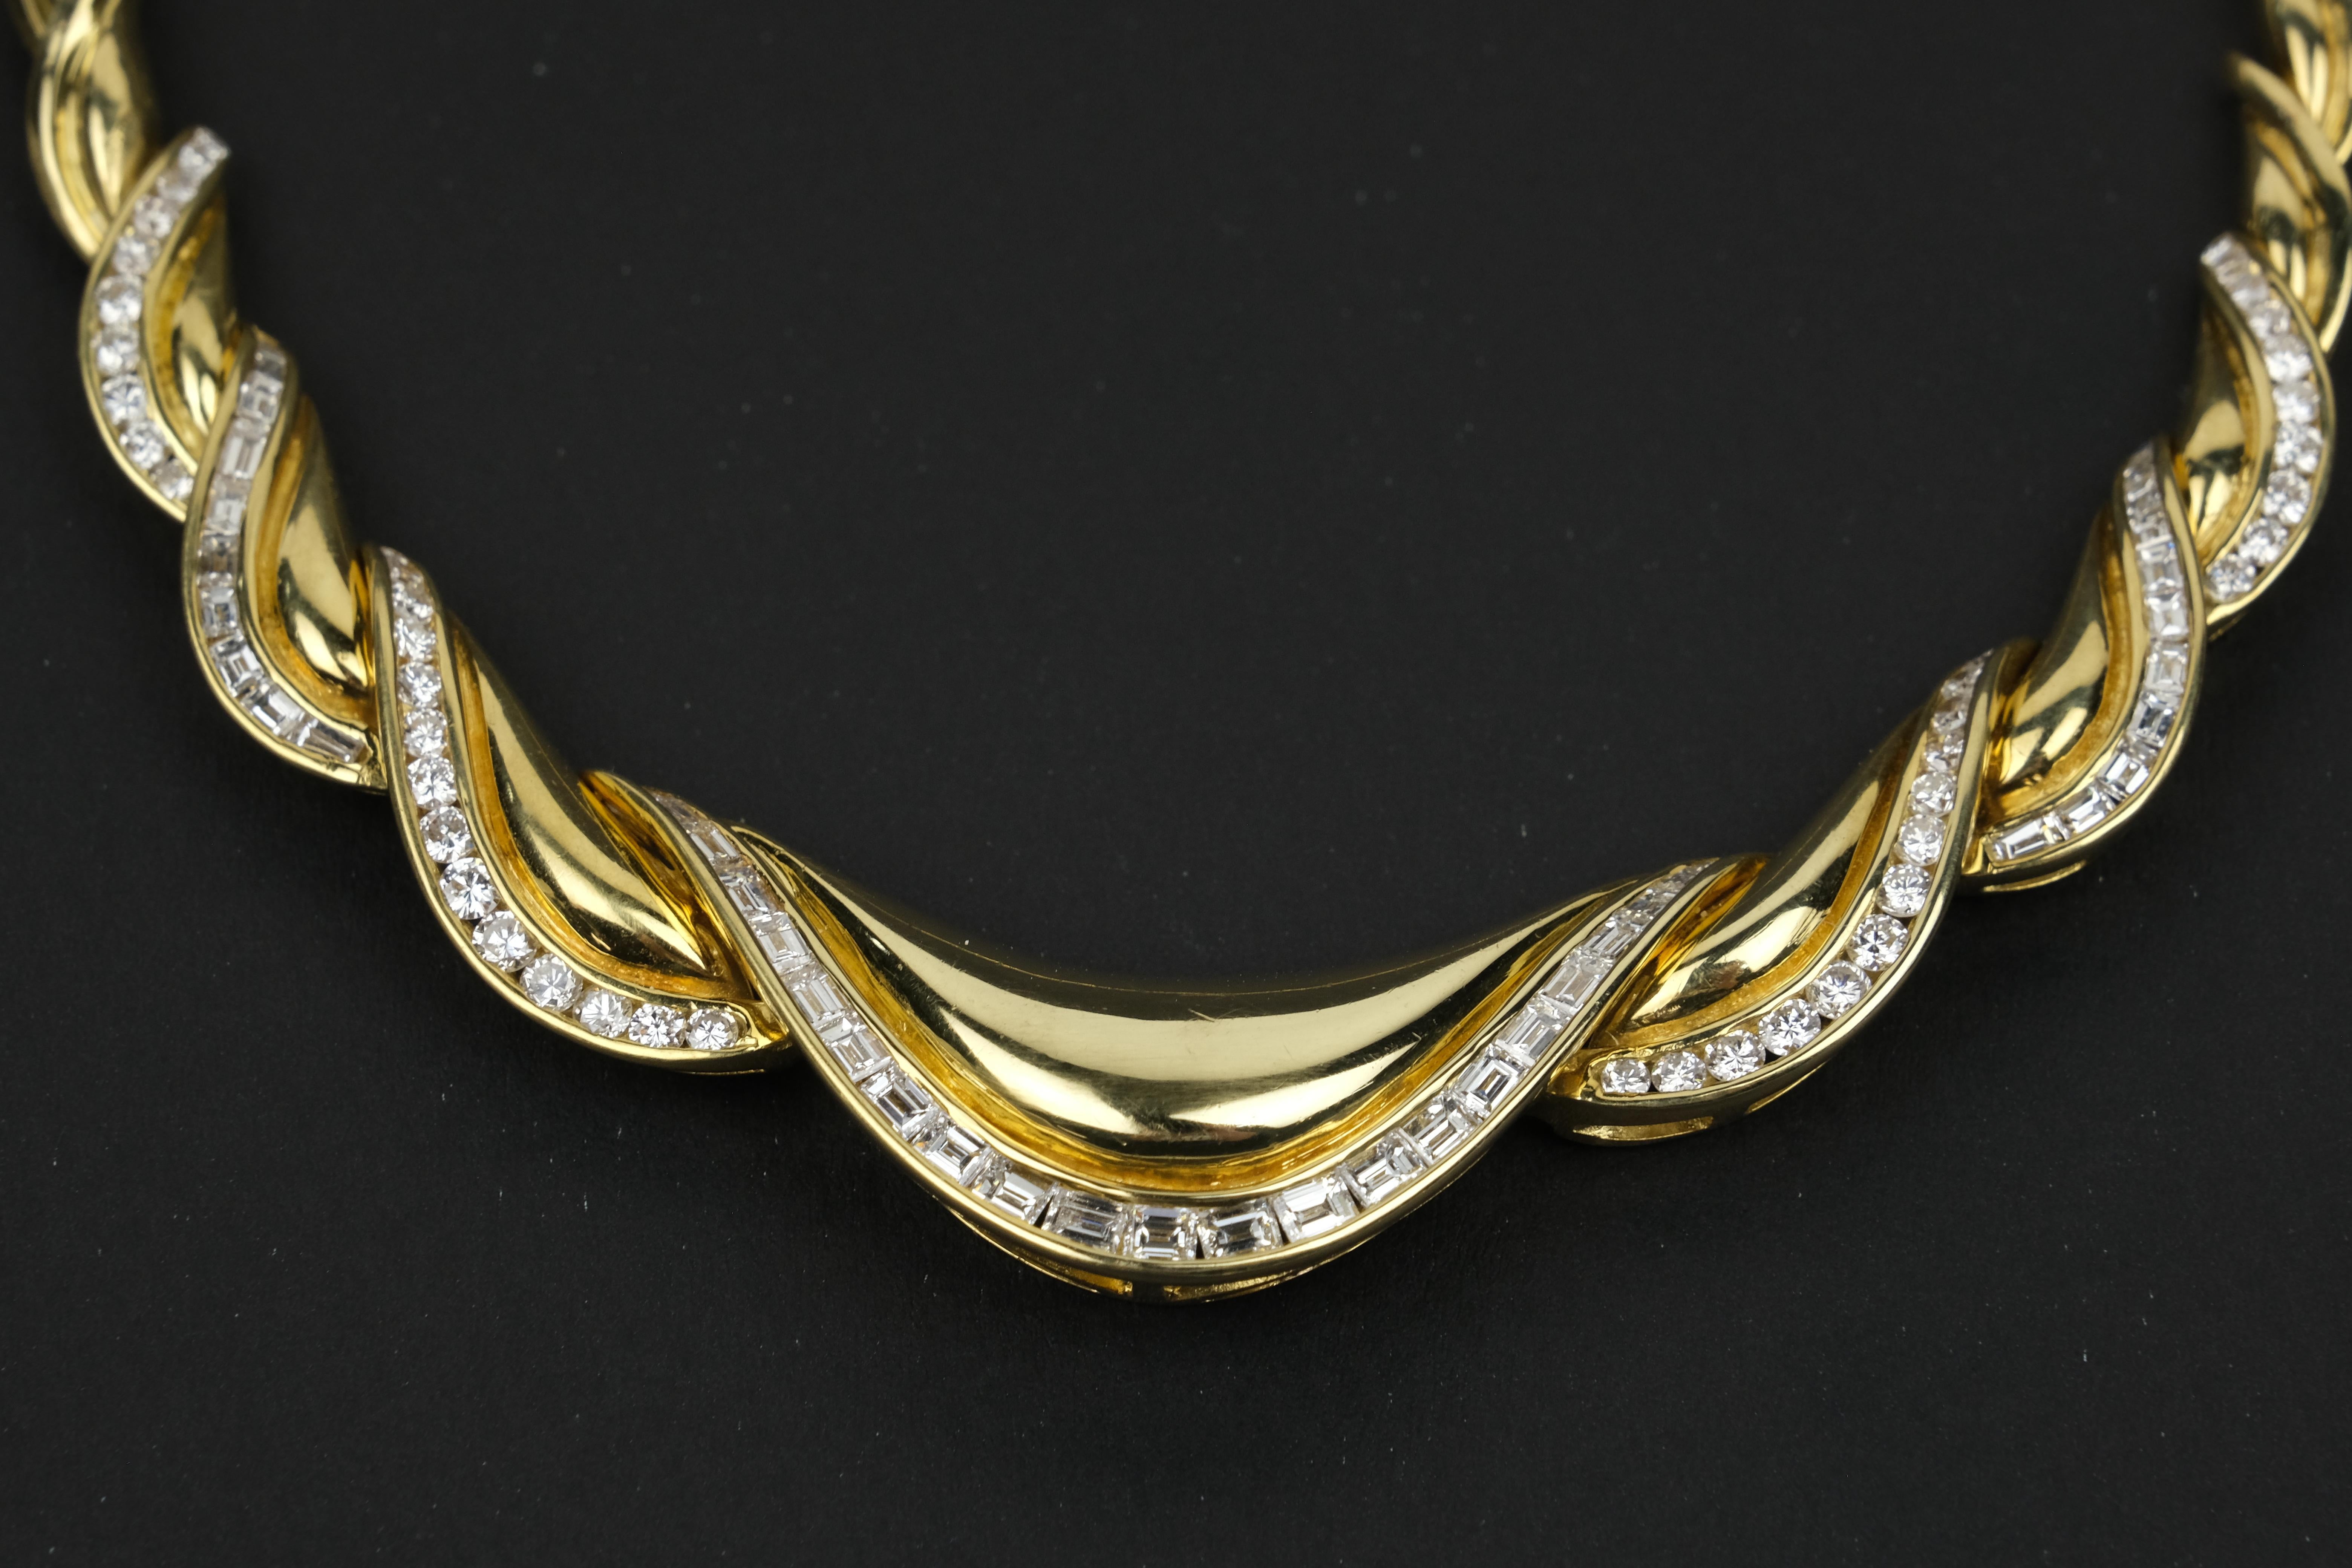 18K 4.35 CTW Diamond Graduated Drape Necklace

Jewelry is as much an expression of art and sculpture as anything found in art galleries or museums.

As with all artistic endeavors, there is good and bad design, even with jewelry fashioned from the